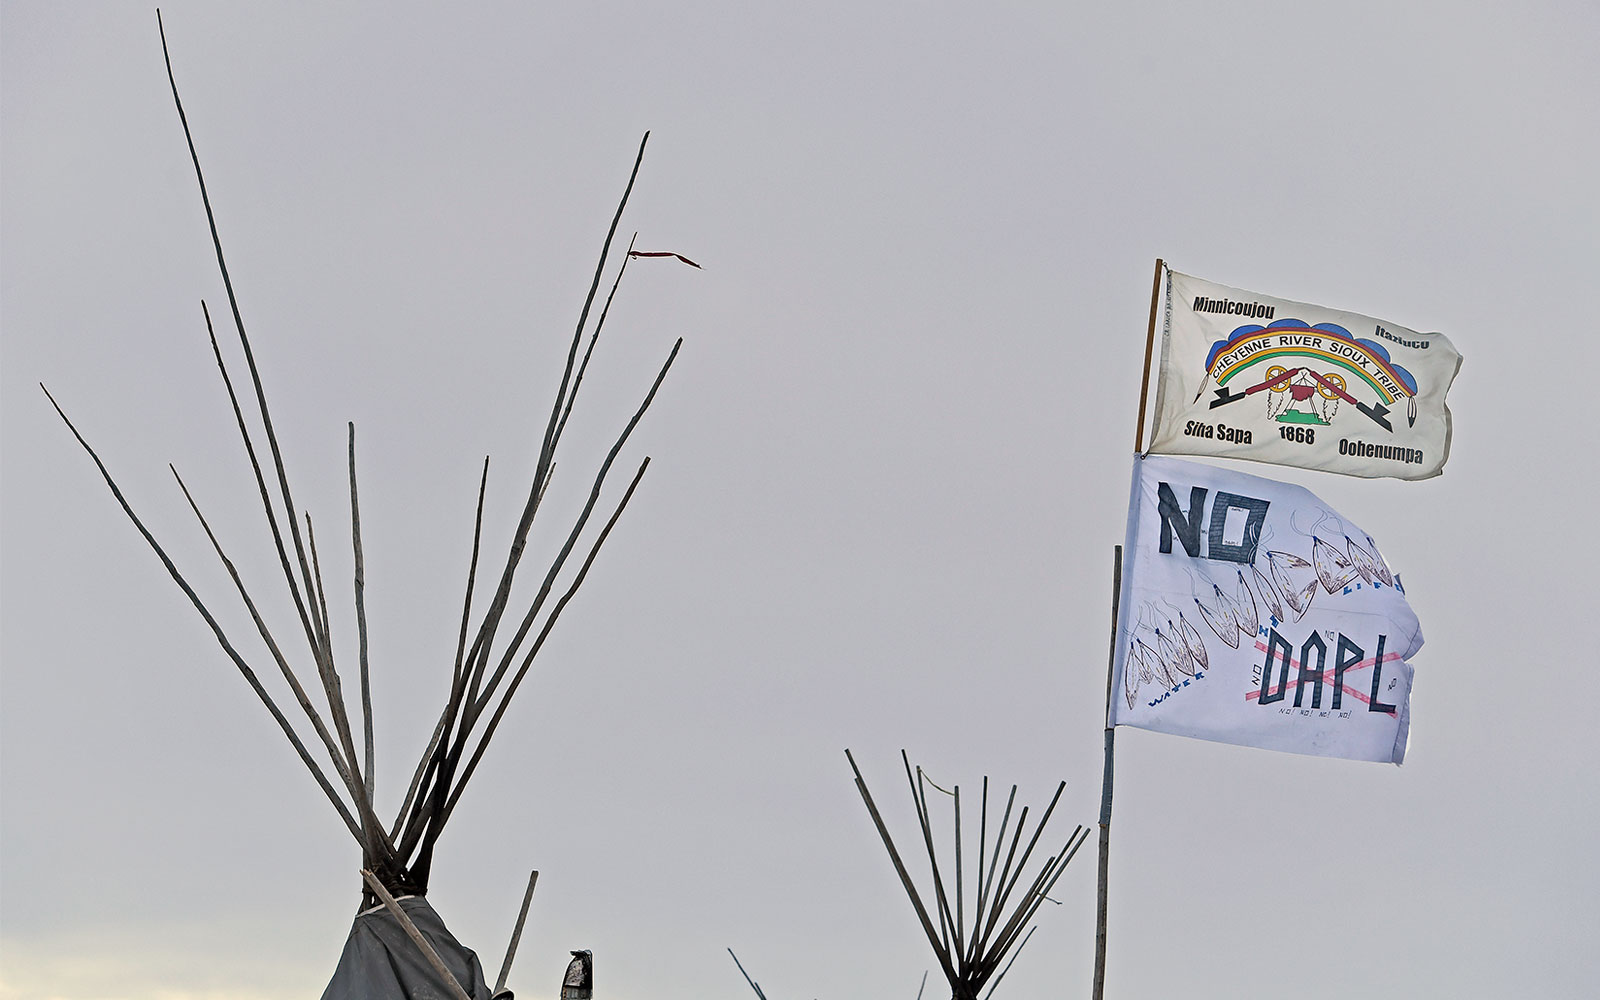 Branches coming out of the tops of tipis next to anti-pipeline flag and flag of the Cheyenne River Sioux Tribe